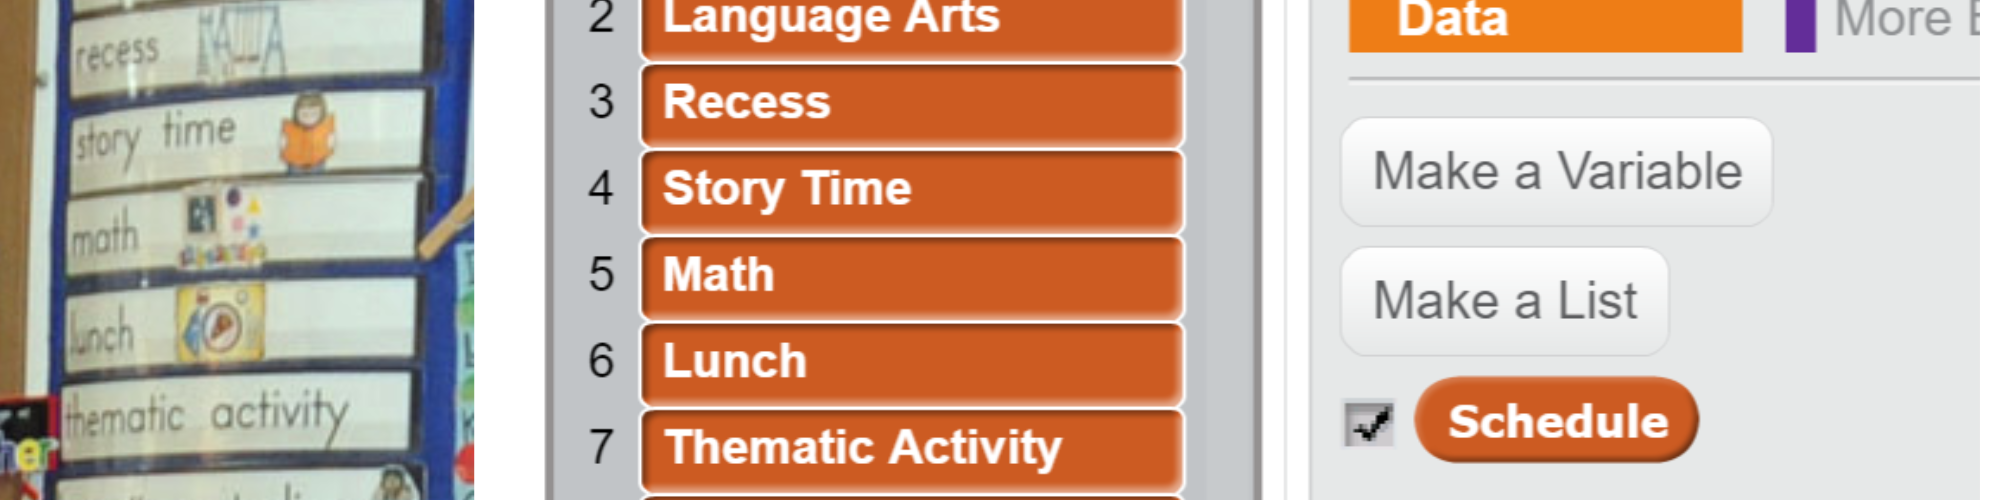 part of a classroom schedule and its representation in Scratch